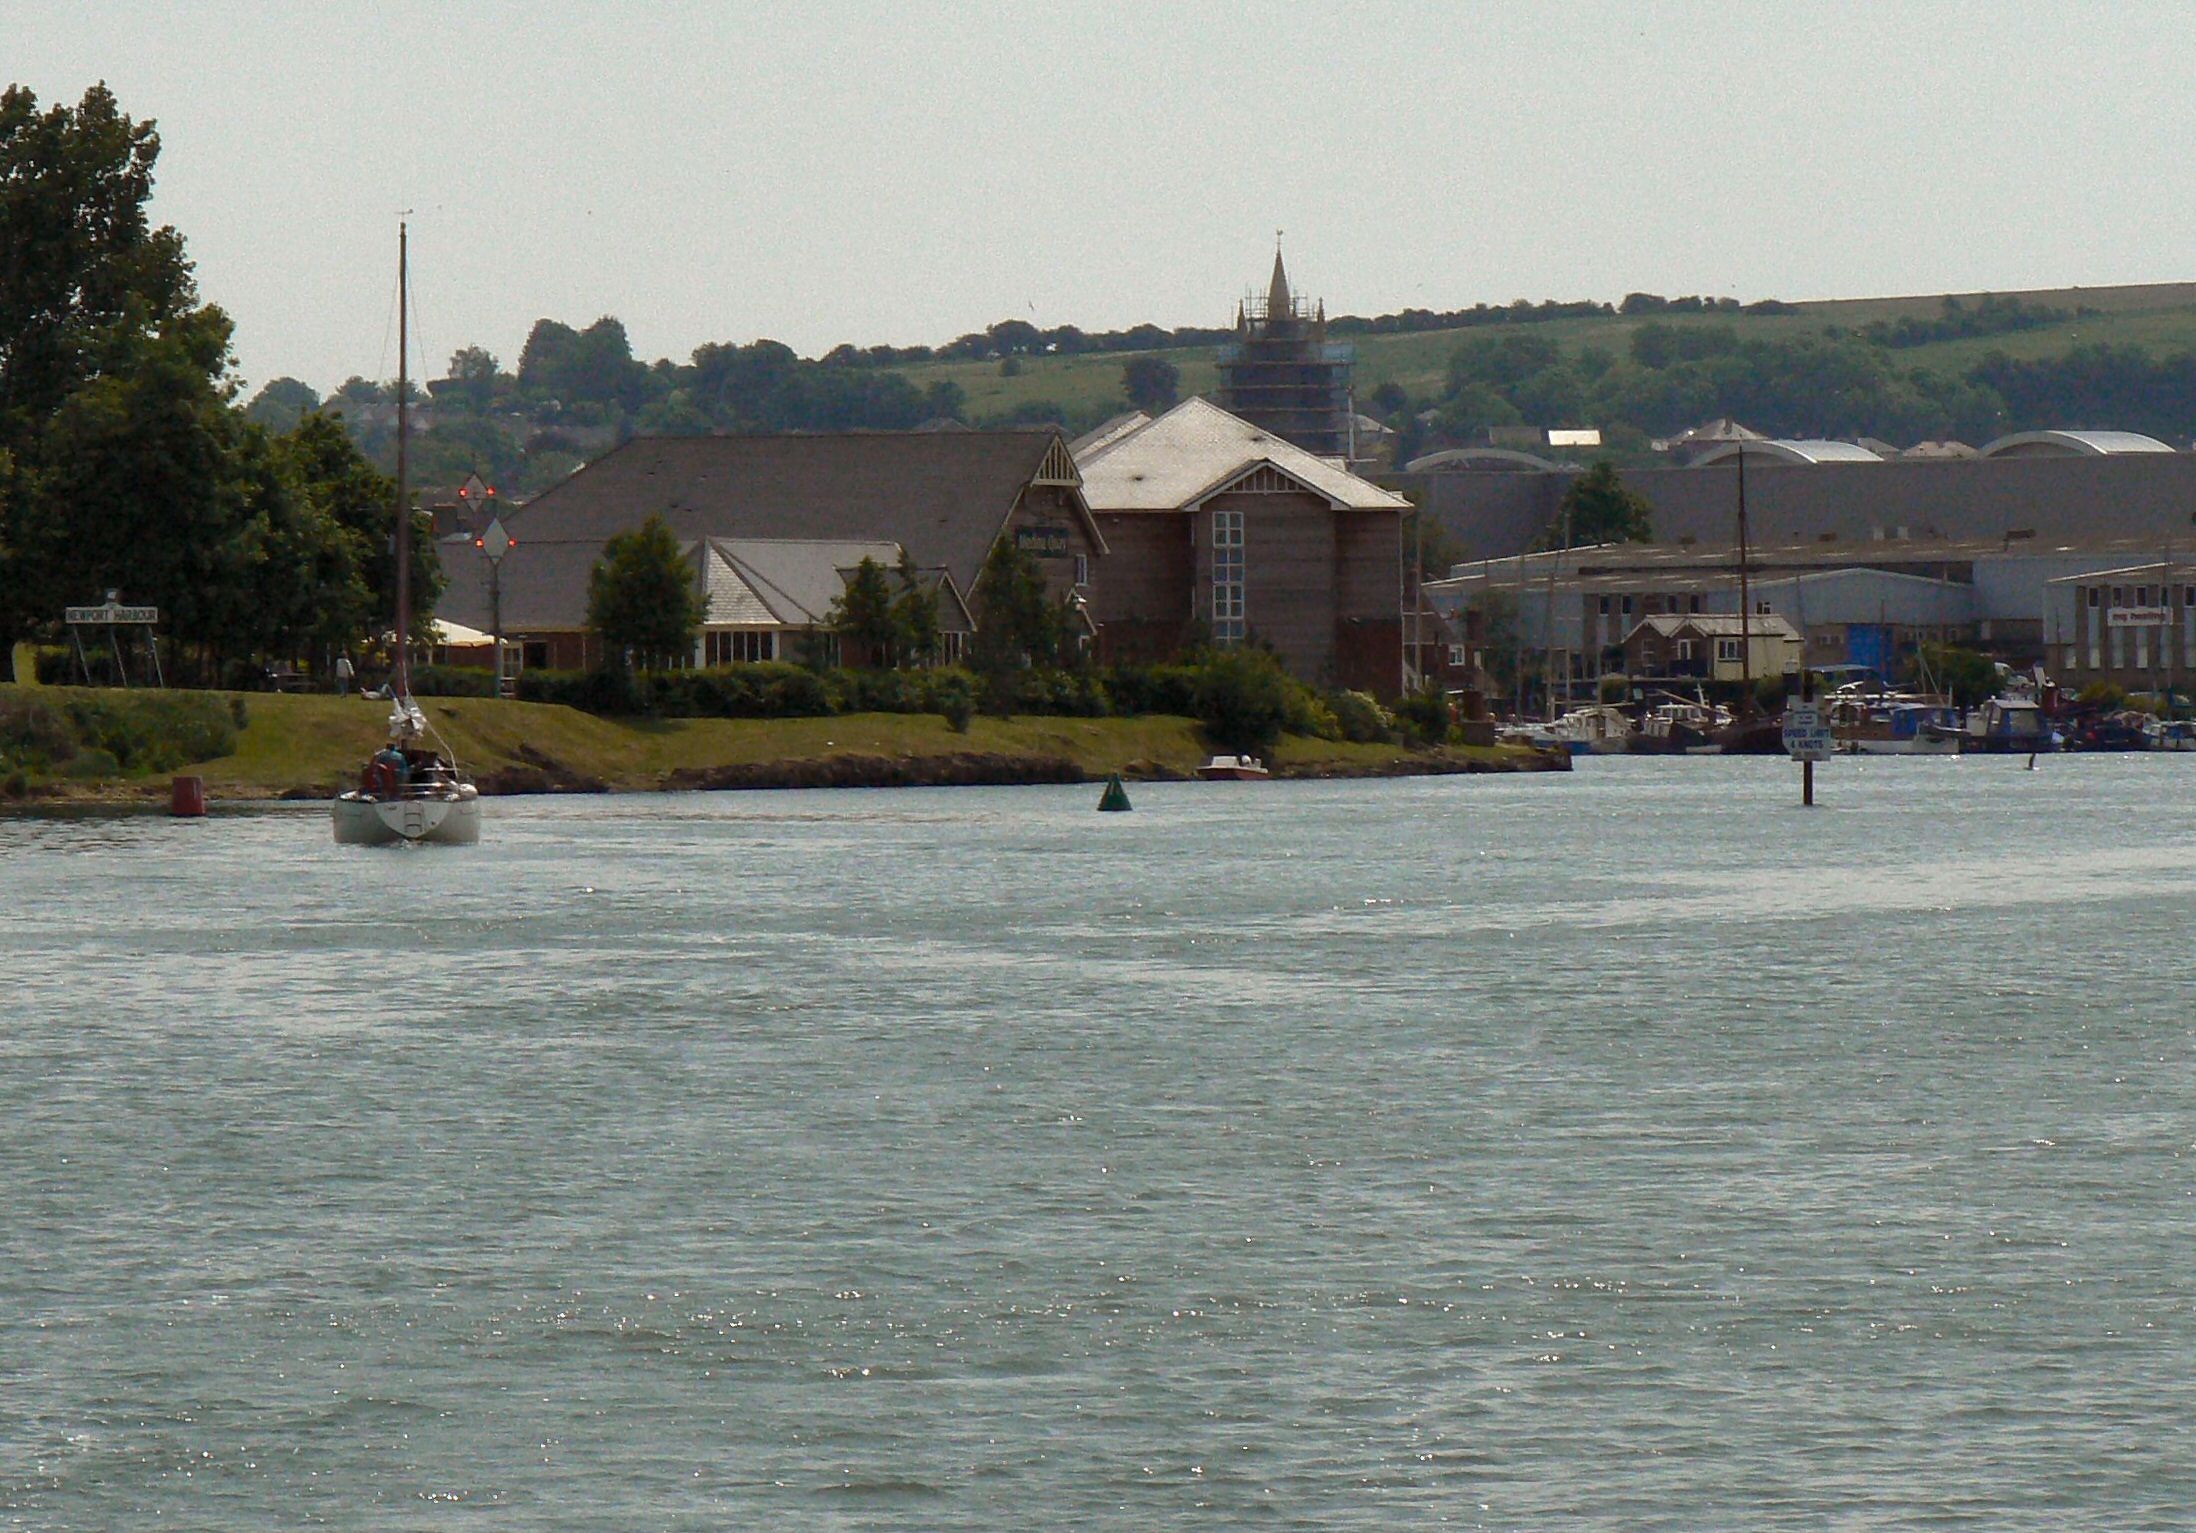 The entrance to Newport Harbour